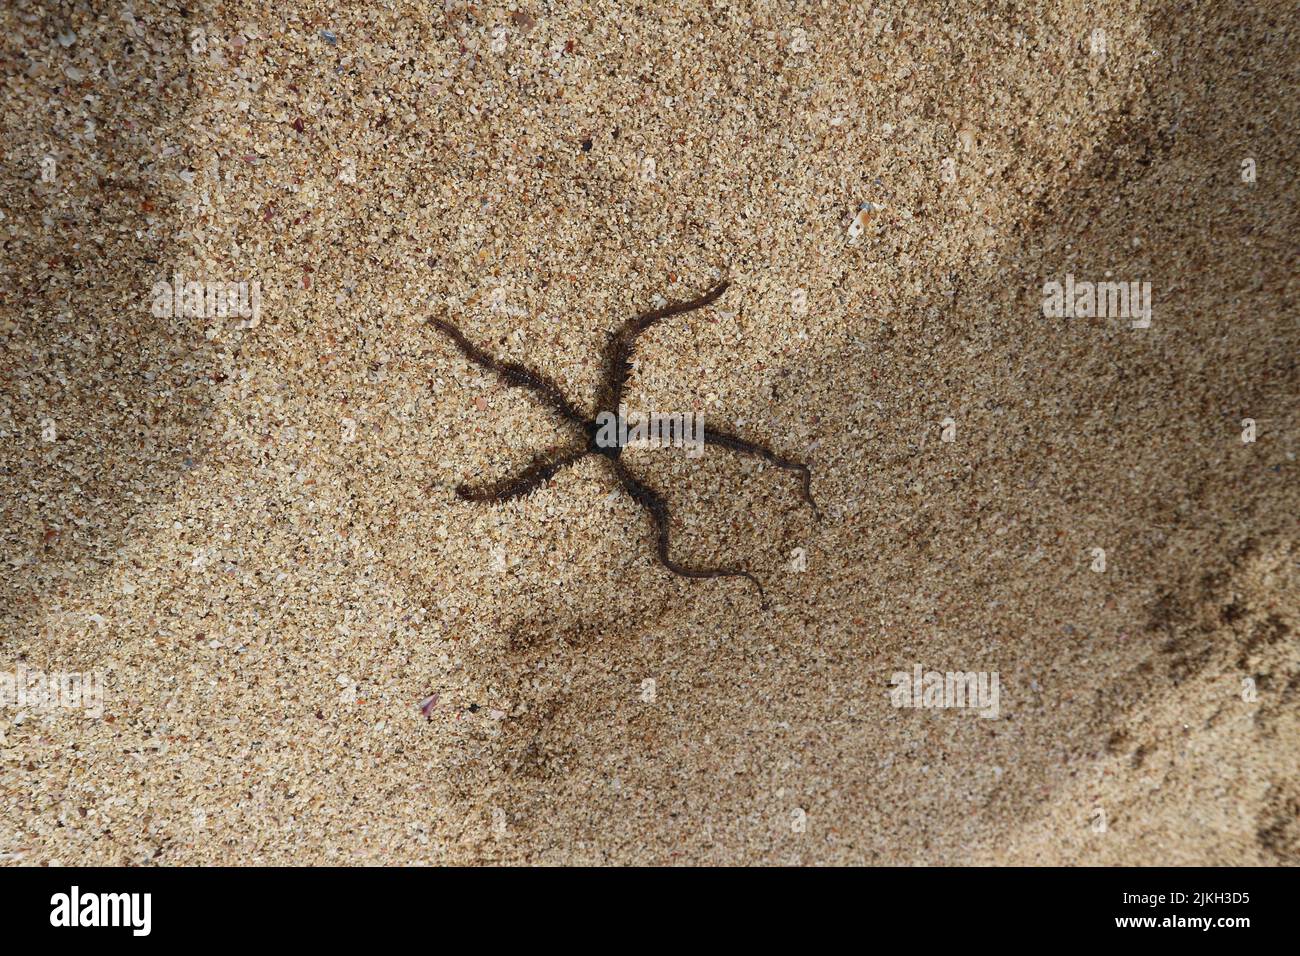 A closeup of Ophiocomina nigra, commonly known as the black brittle star or black serpent star. Stock Photo